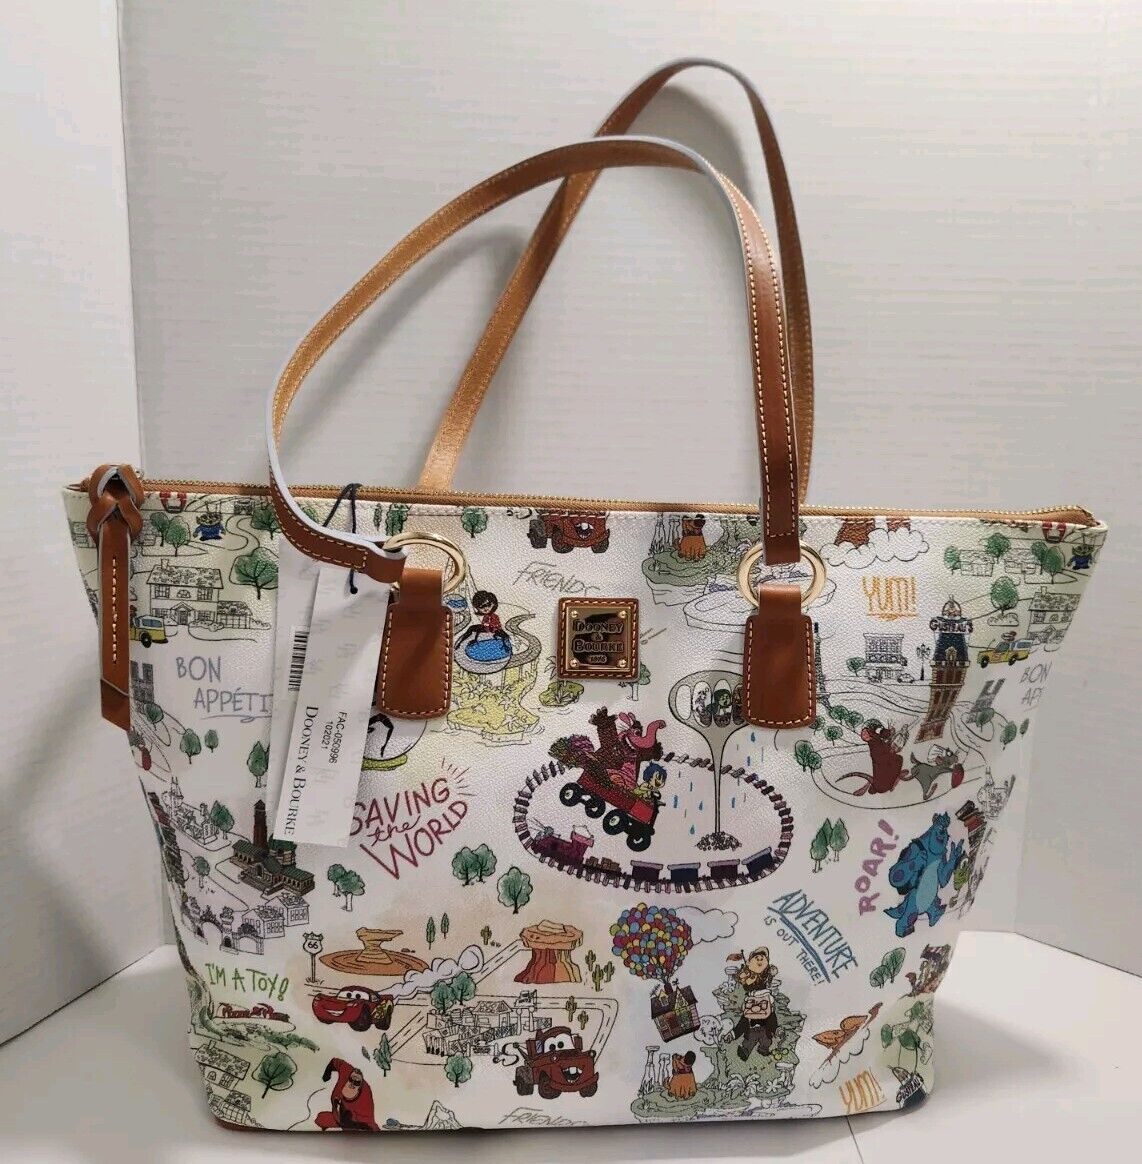 NEW NWT Dooney & Bourke Disney Parks Pixar Map Tote Large Bag Toy Story Cars Up 